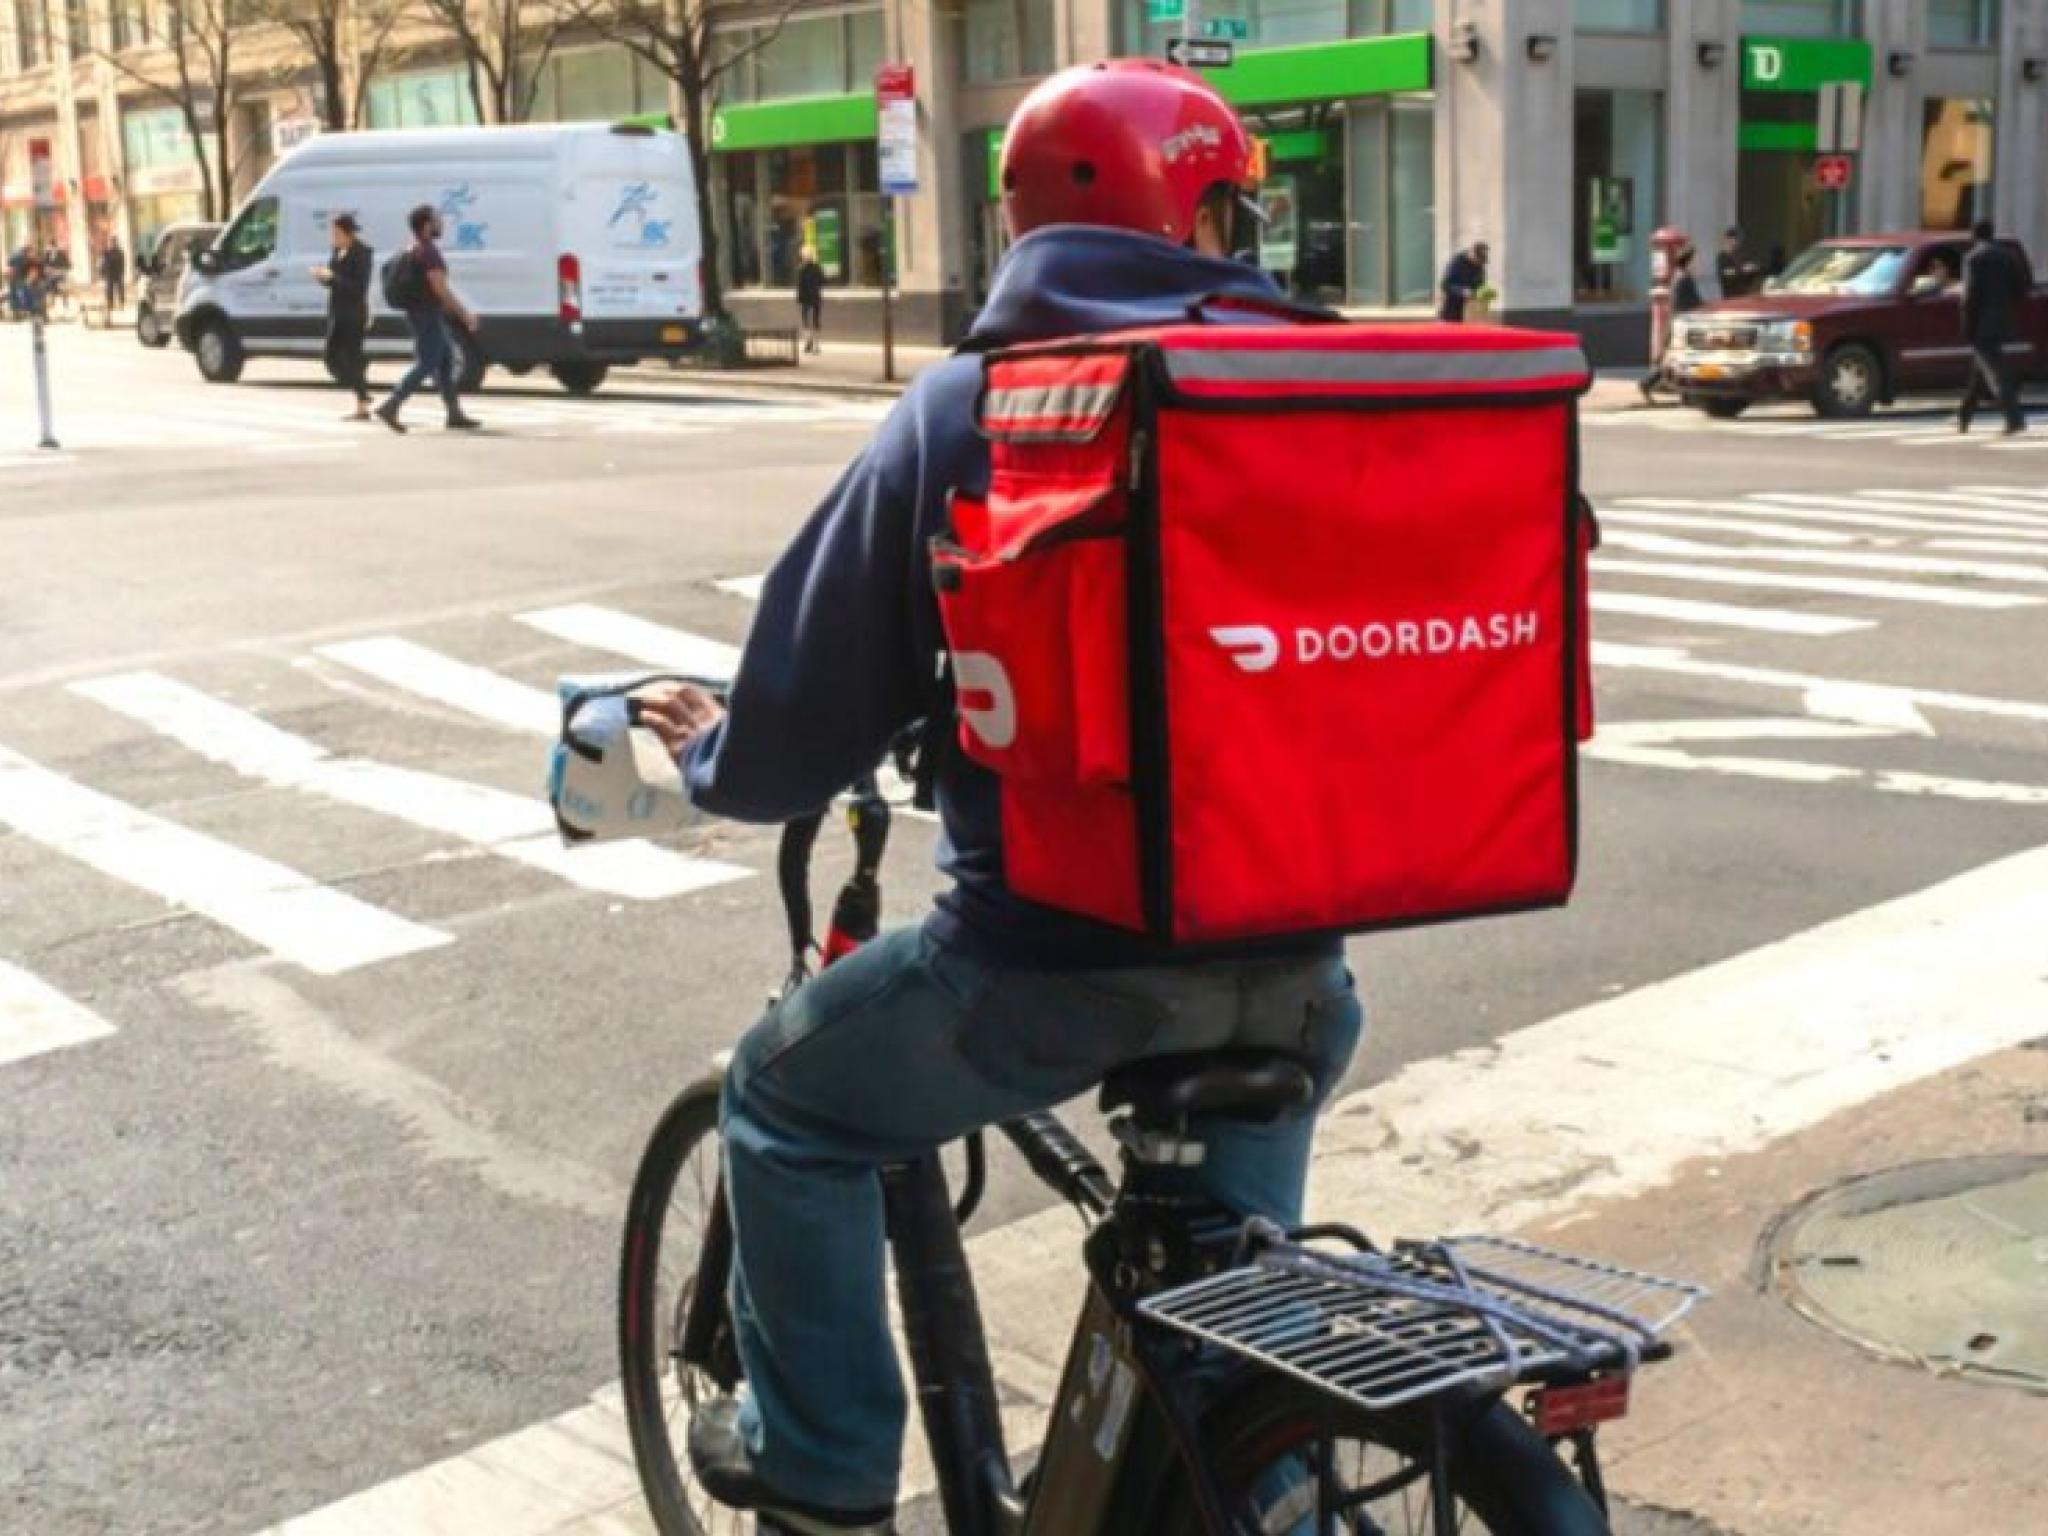  top-food-delivery-giants-like-doordash-deliveroo-report-over-20b-in-losses-since-going-public-amid-challenging-economic-climate 